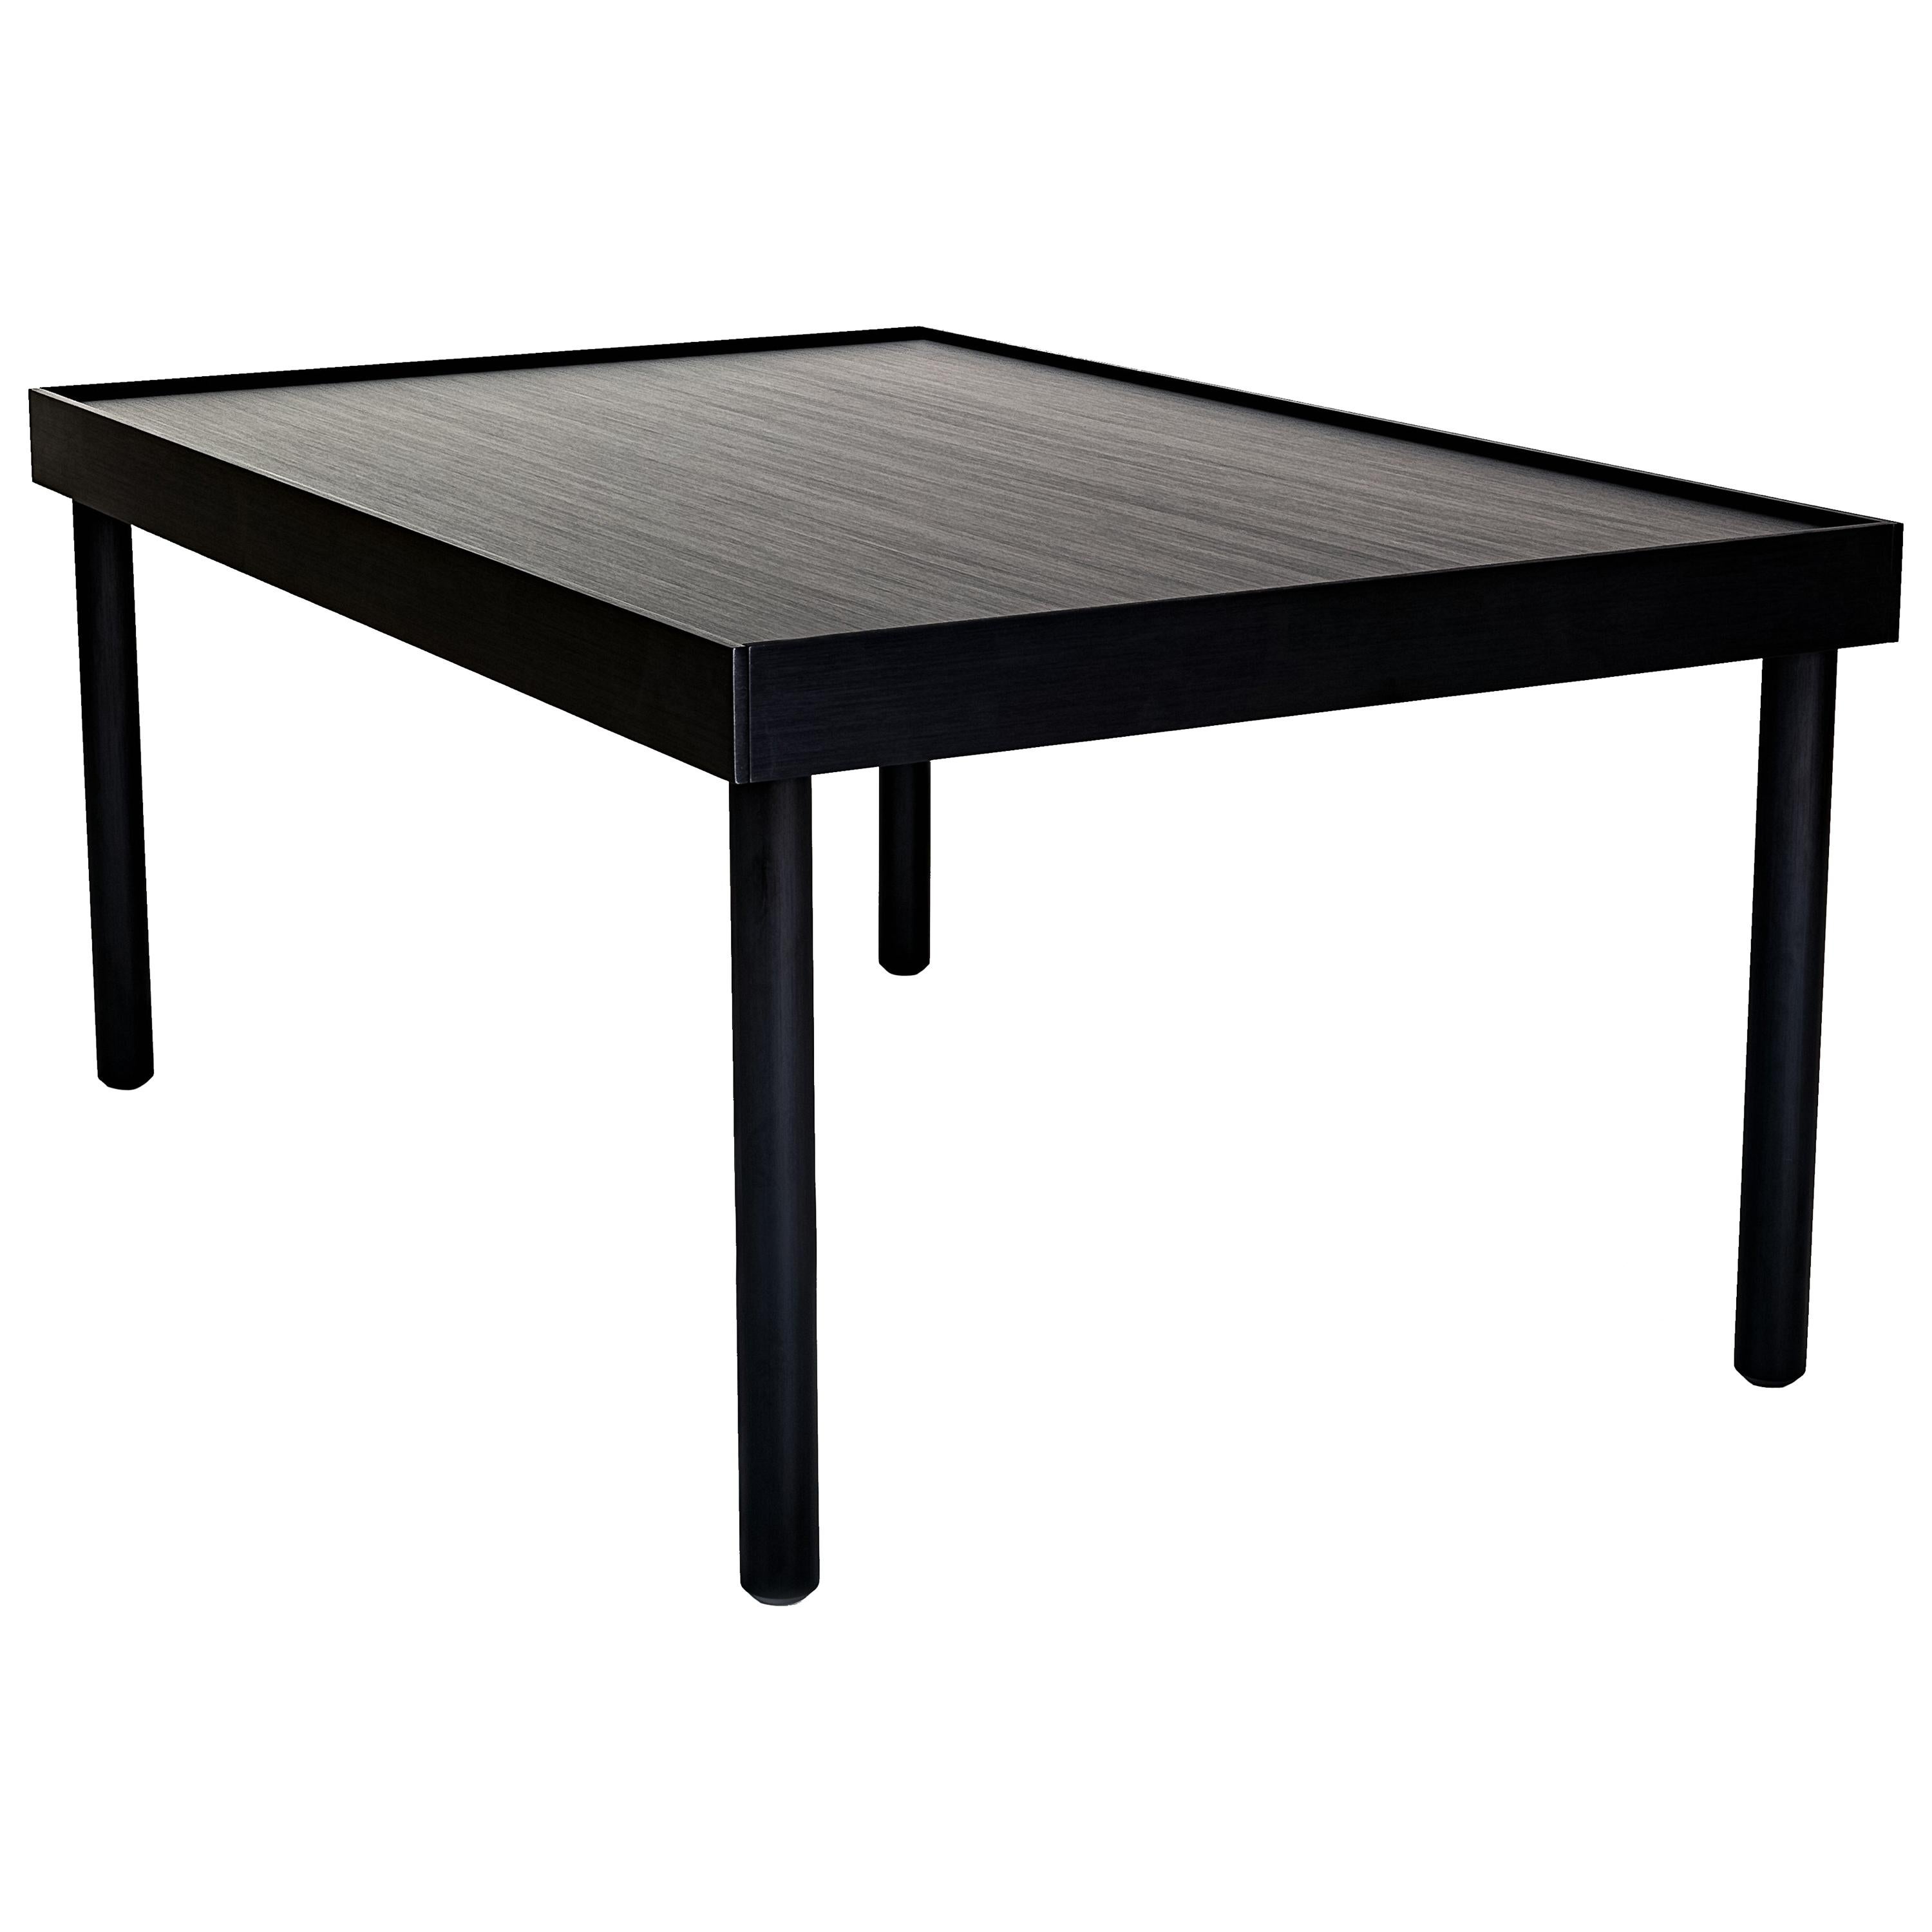 Tea table in brushed and anodized aluminum plate and CNC milled bar. Made of milled 3/8 inch thick aluminum plate with 1 and 1/4 inch diameter CNC-cut aluminum legs that screw into tapped blind holes to the underside of the top surface. These legs